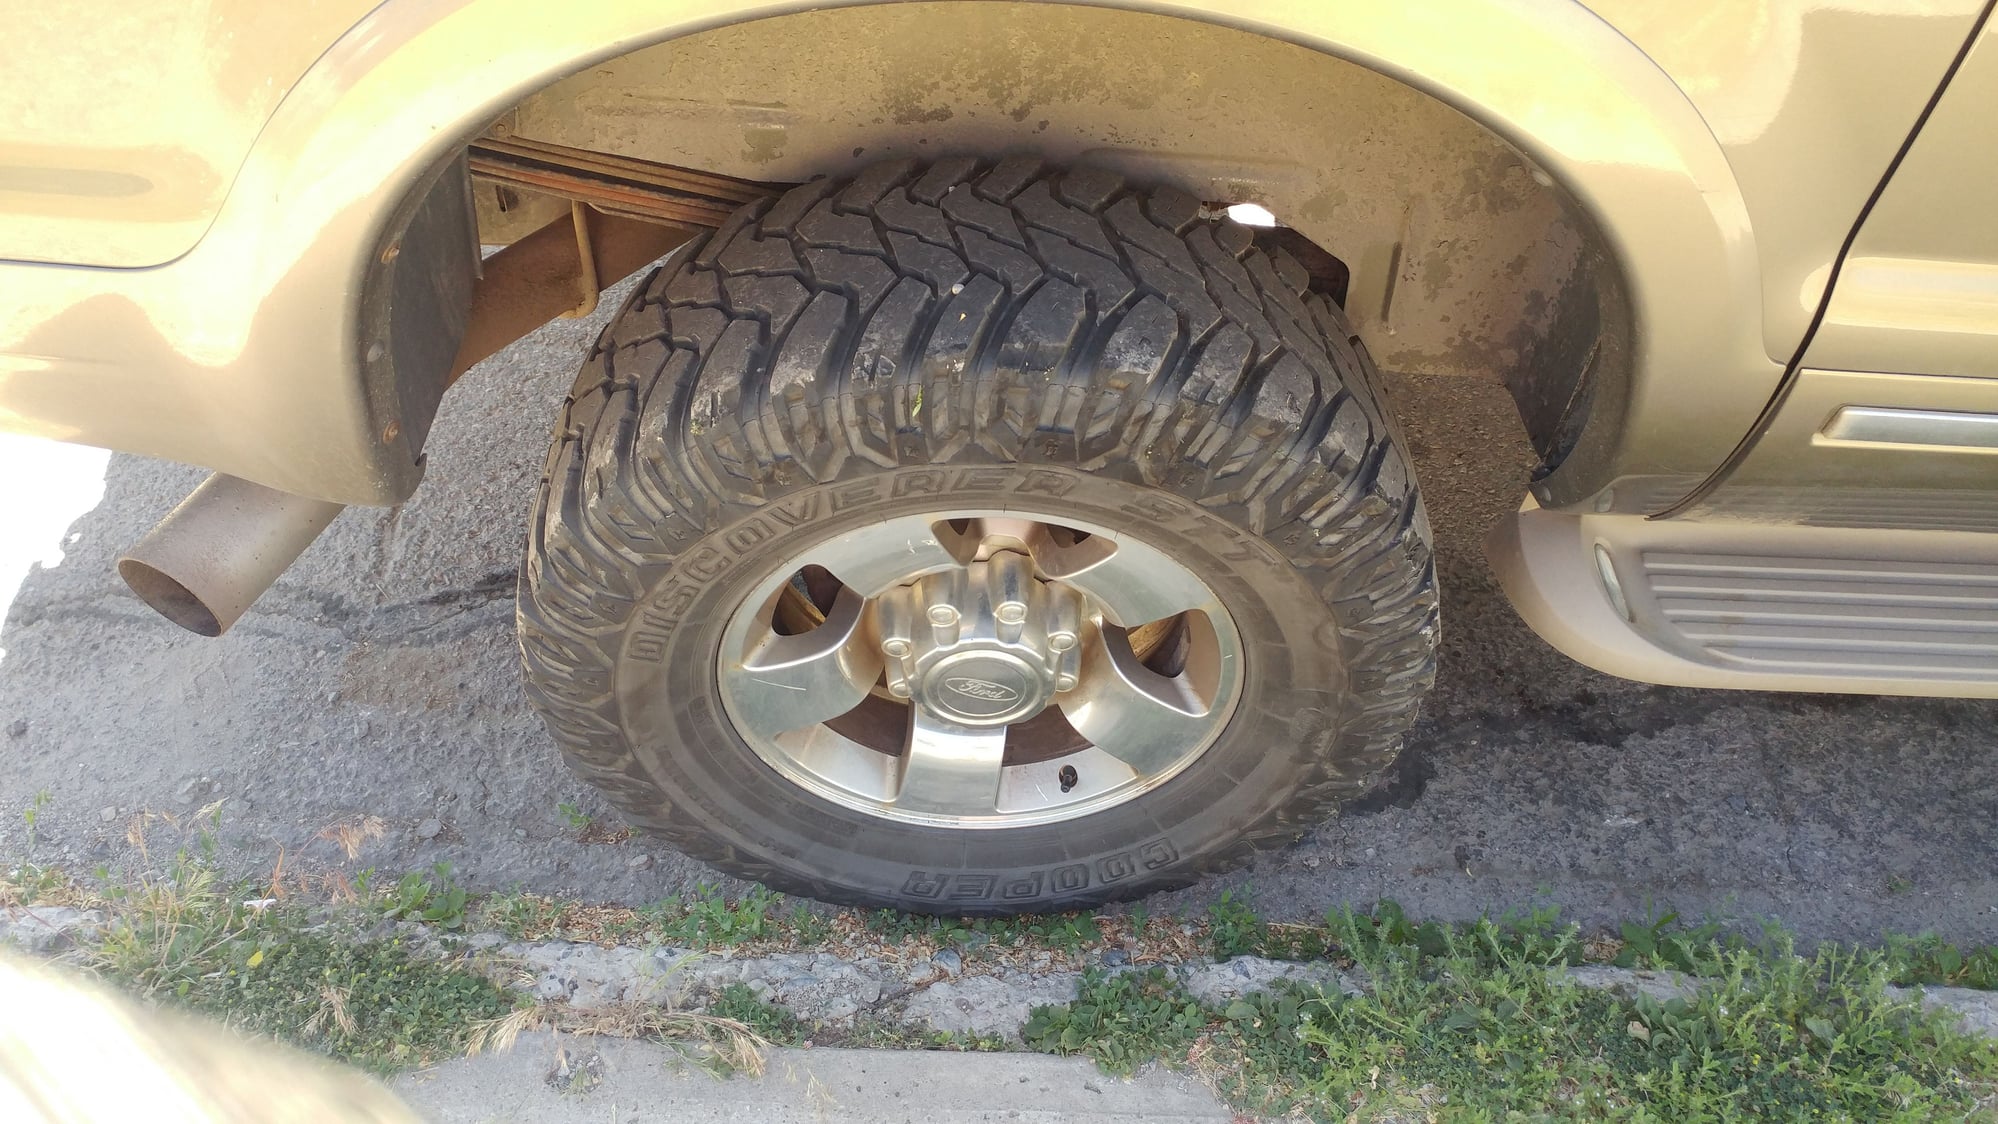 Wheels and Tires/Axles - 2004 king ranch wheels - Used - Durango, CO 81301, United States